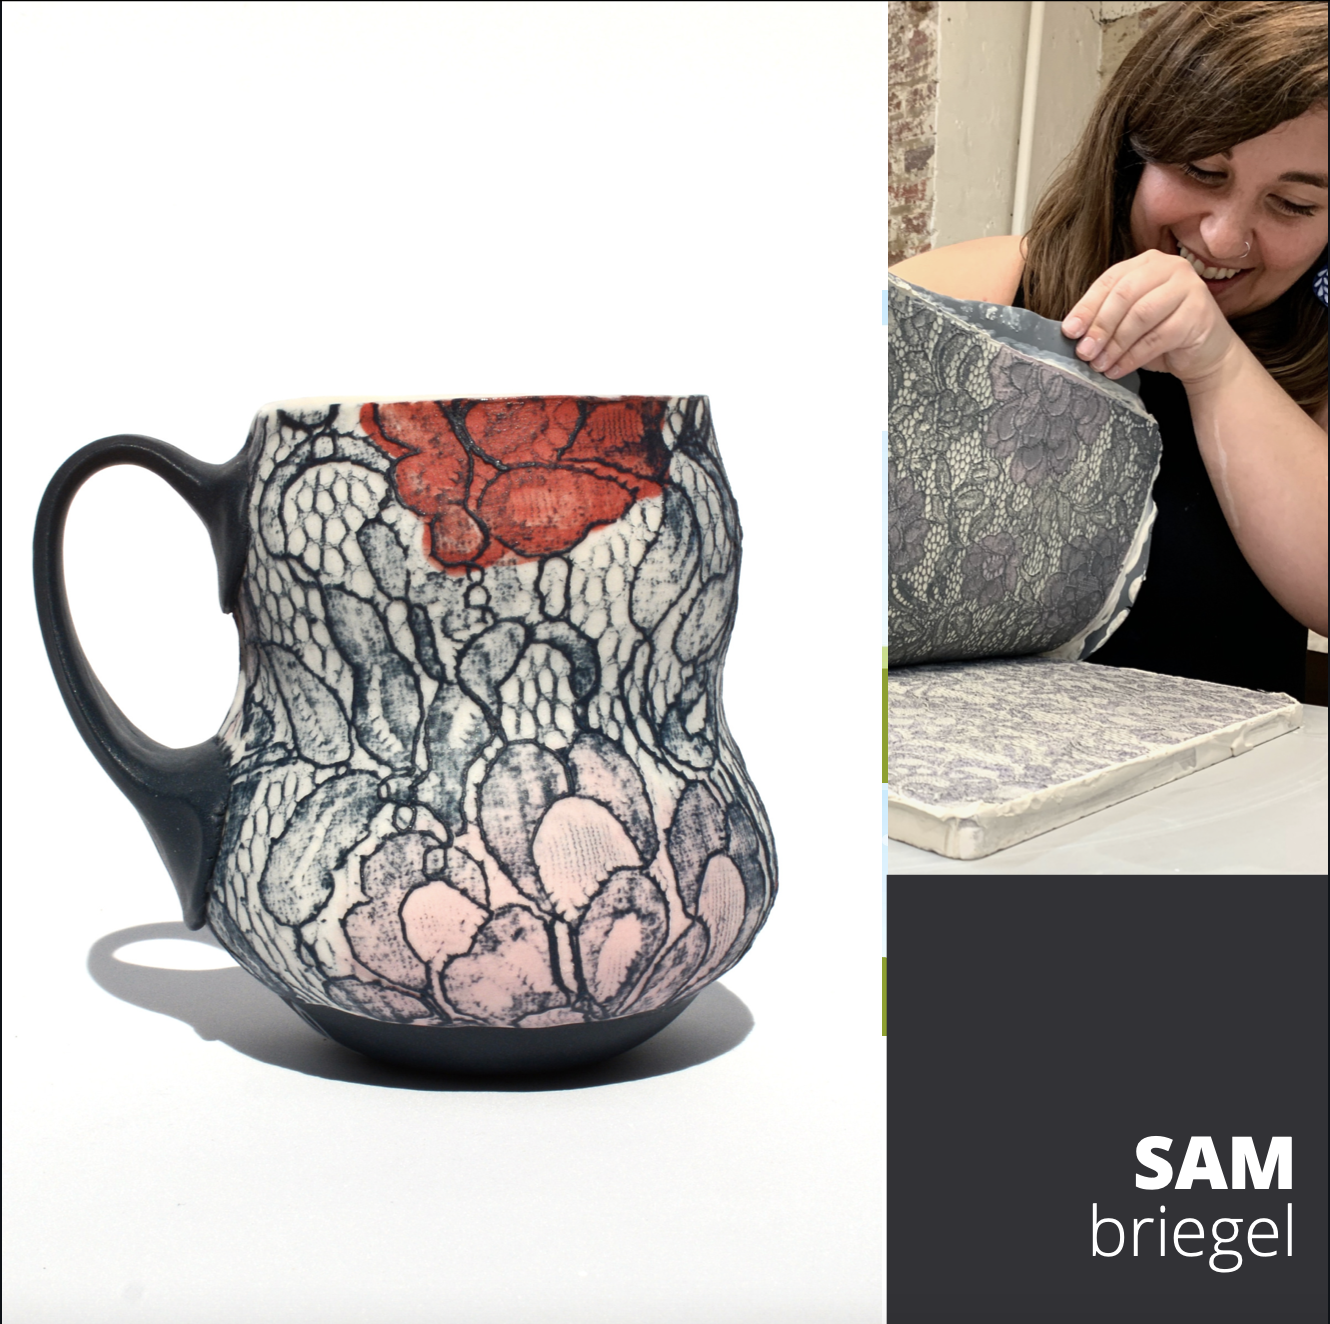 CLOTHING-INSPIRED TEXTURES AND STAINED PORCELAIN SLABS TO MAKE A MUG WITH SAM BRIEGEL